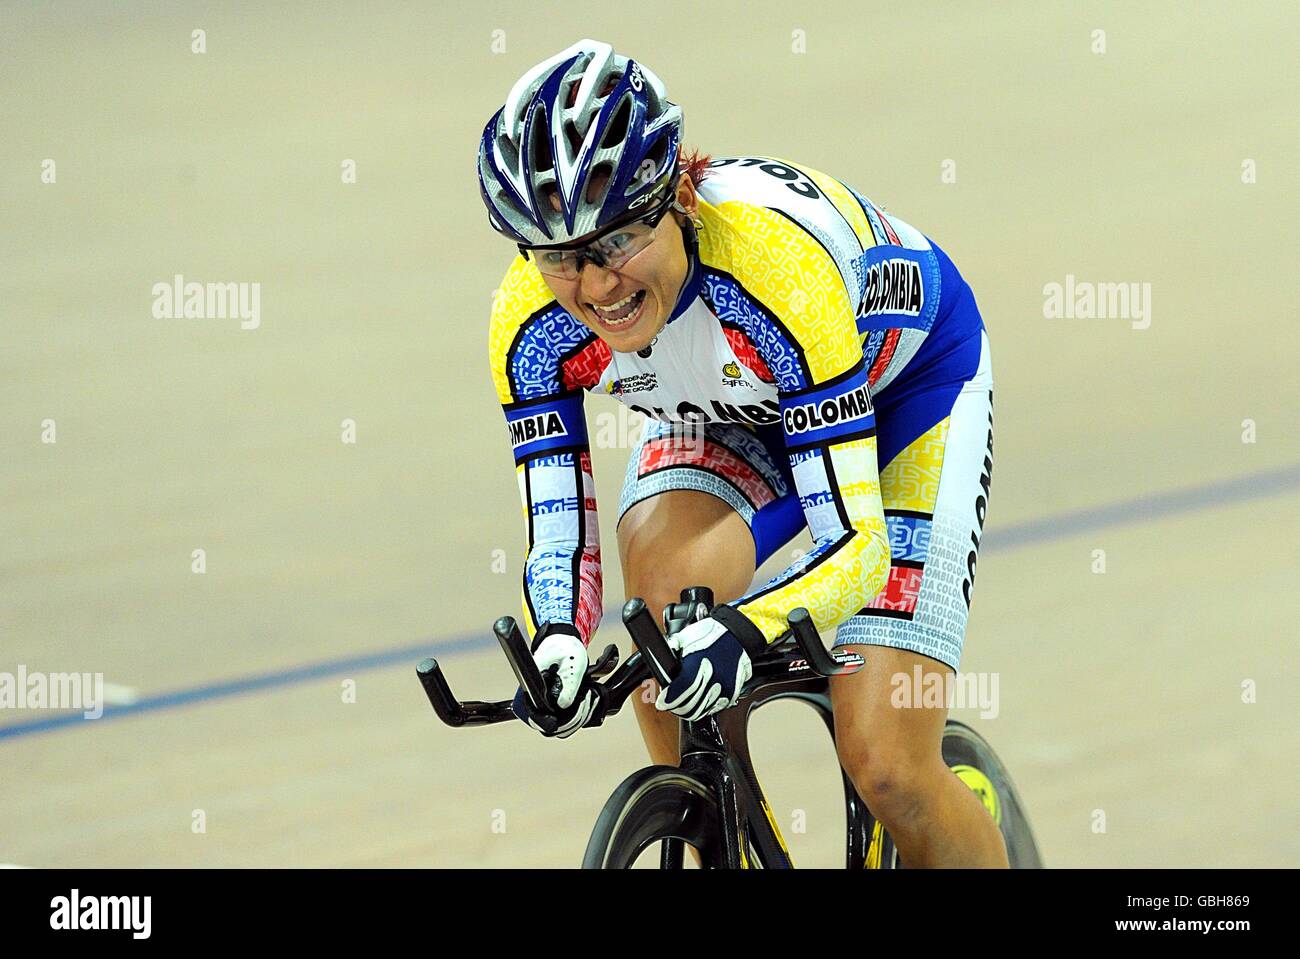 Colombia's Diana Maria Garica Orrego during the Women's 500m Time Trail during the 2009 UCI World Track Cycling Championships at the BGZ Arena Velodrome in Pruszkow, Poland. Stock Photo